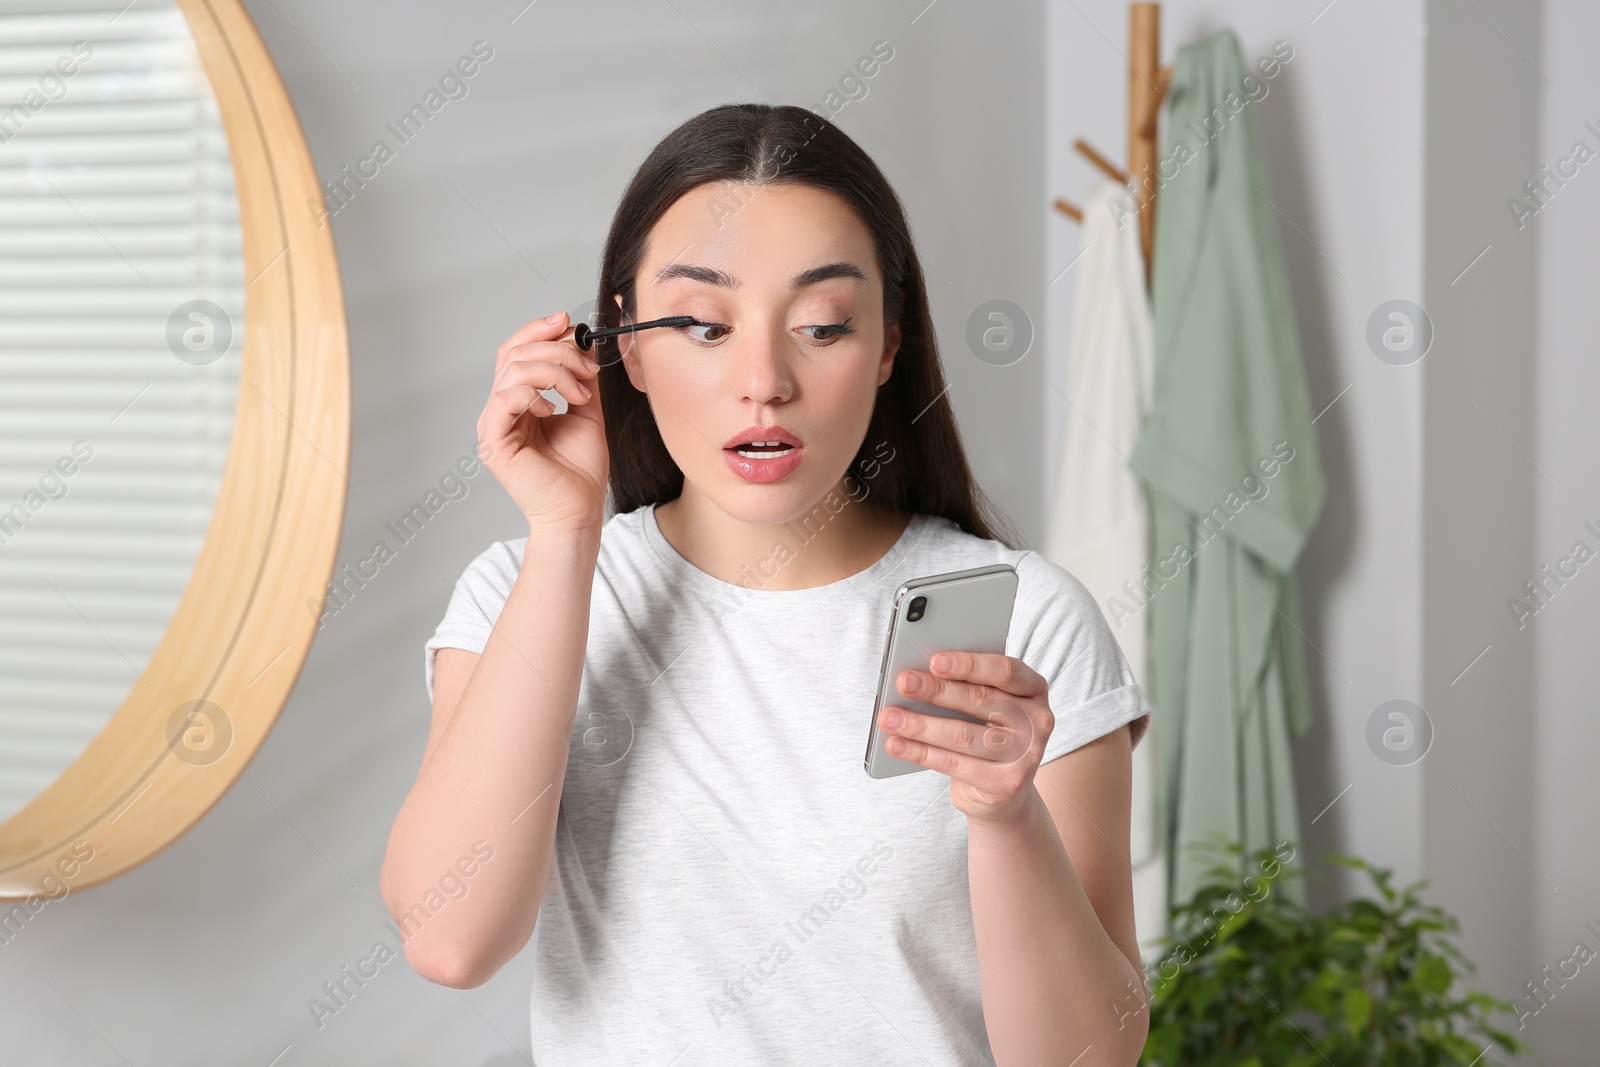 Photo of Beautiful young woman using smartphone while applying mascara in bathroom. Internet addiction